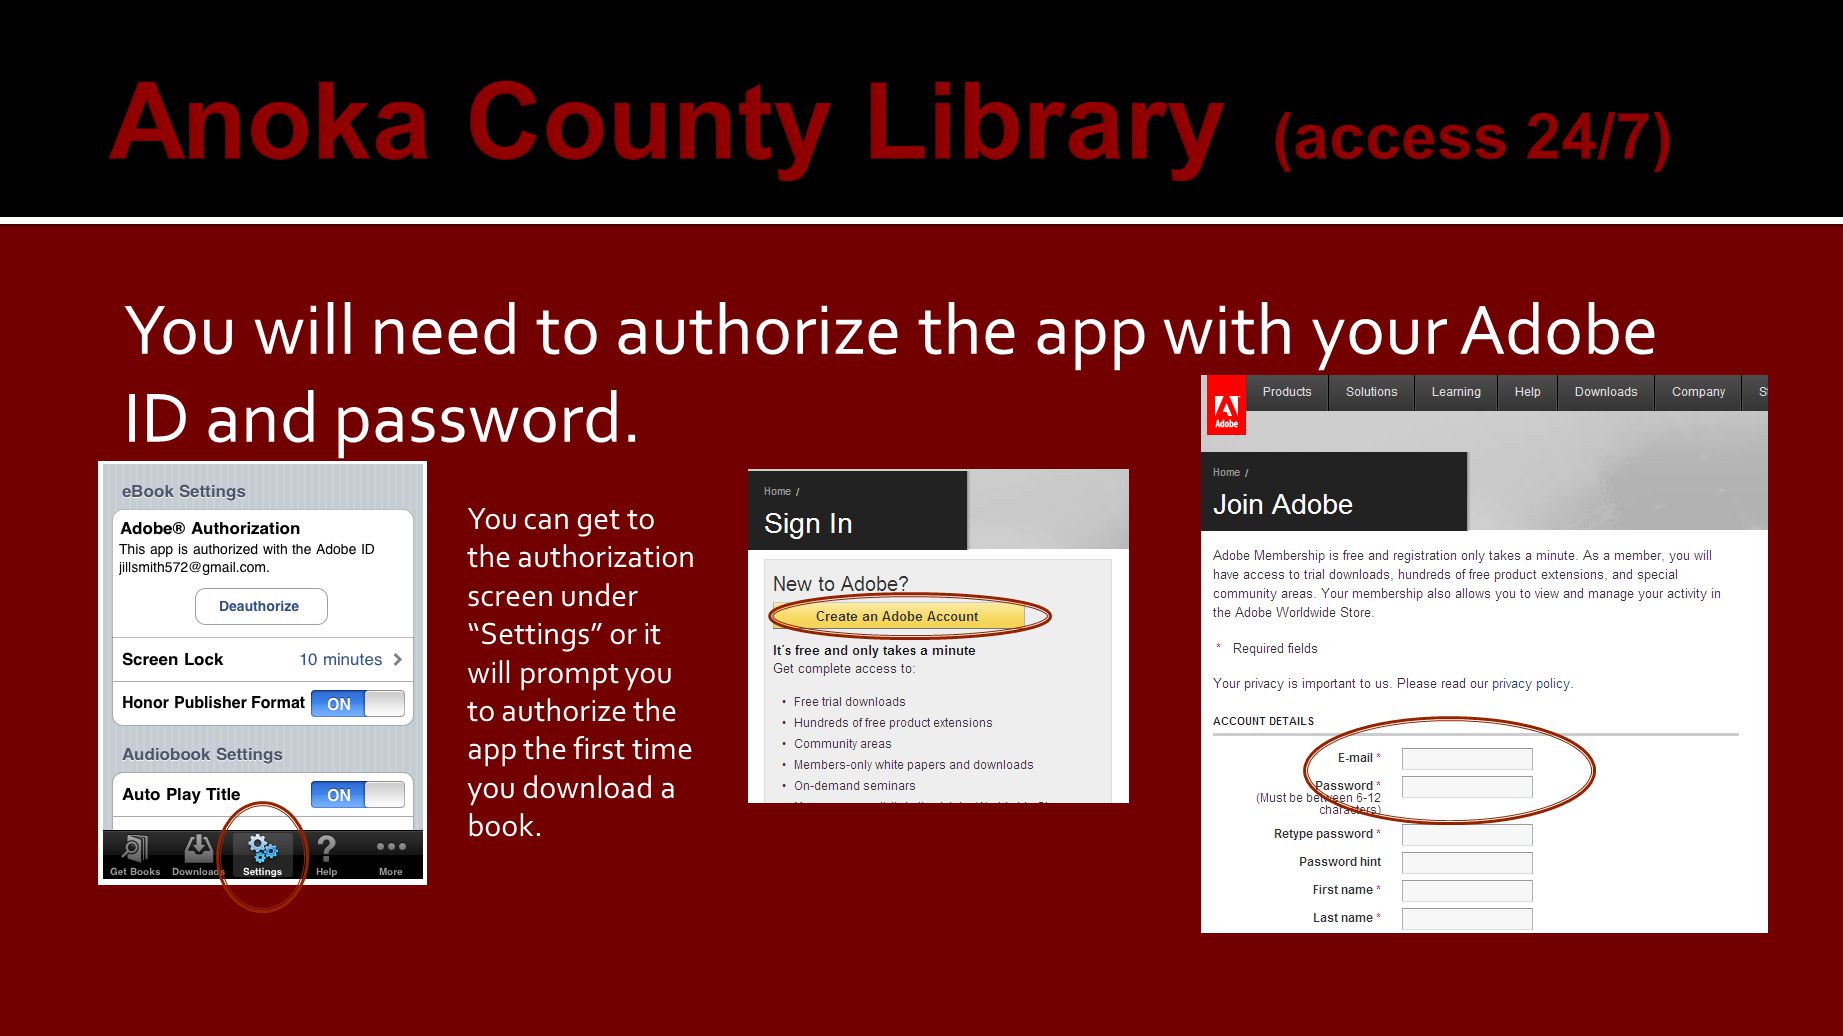 You will need to authorize the app with your Adobe ID and password.